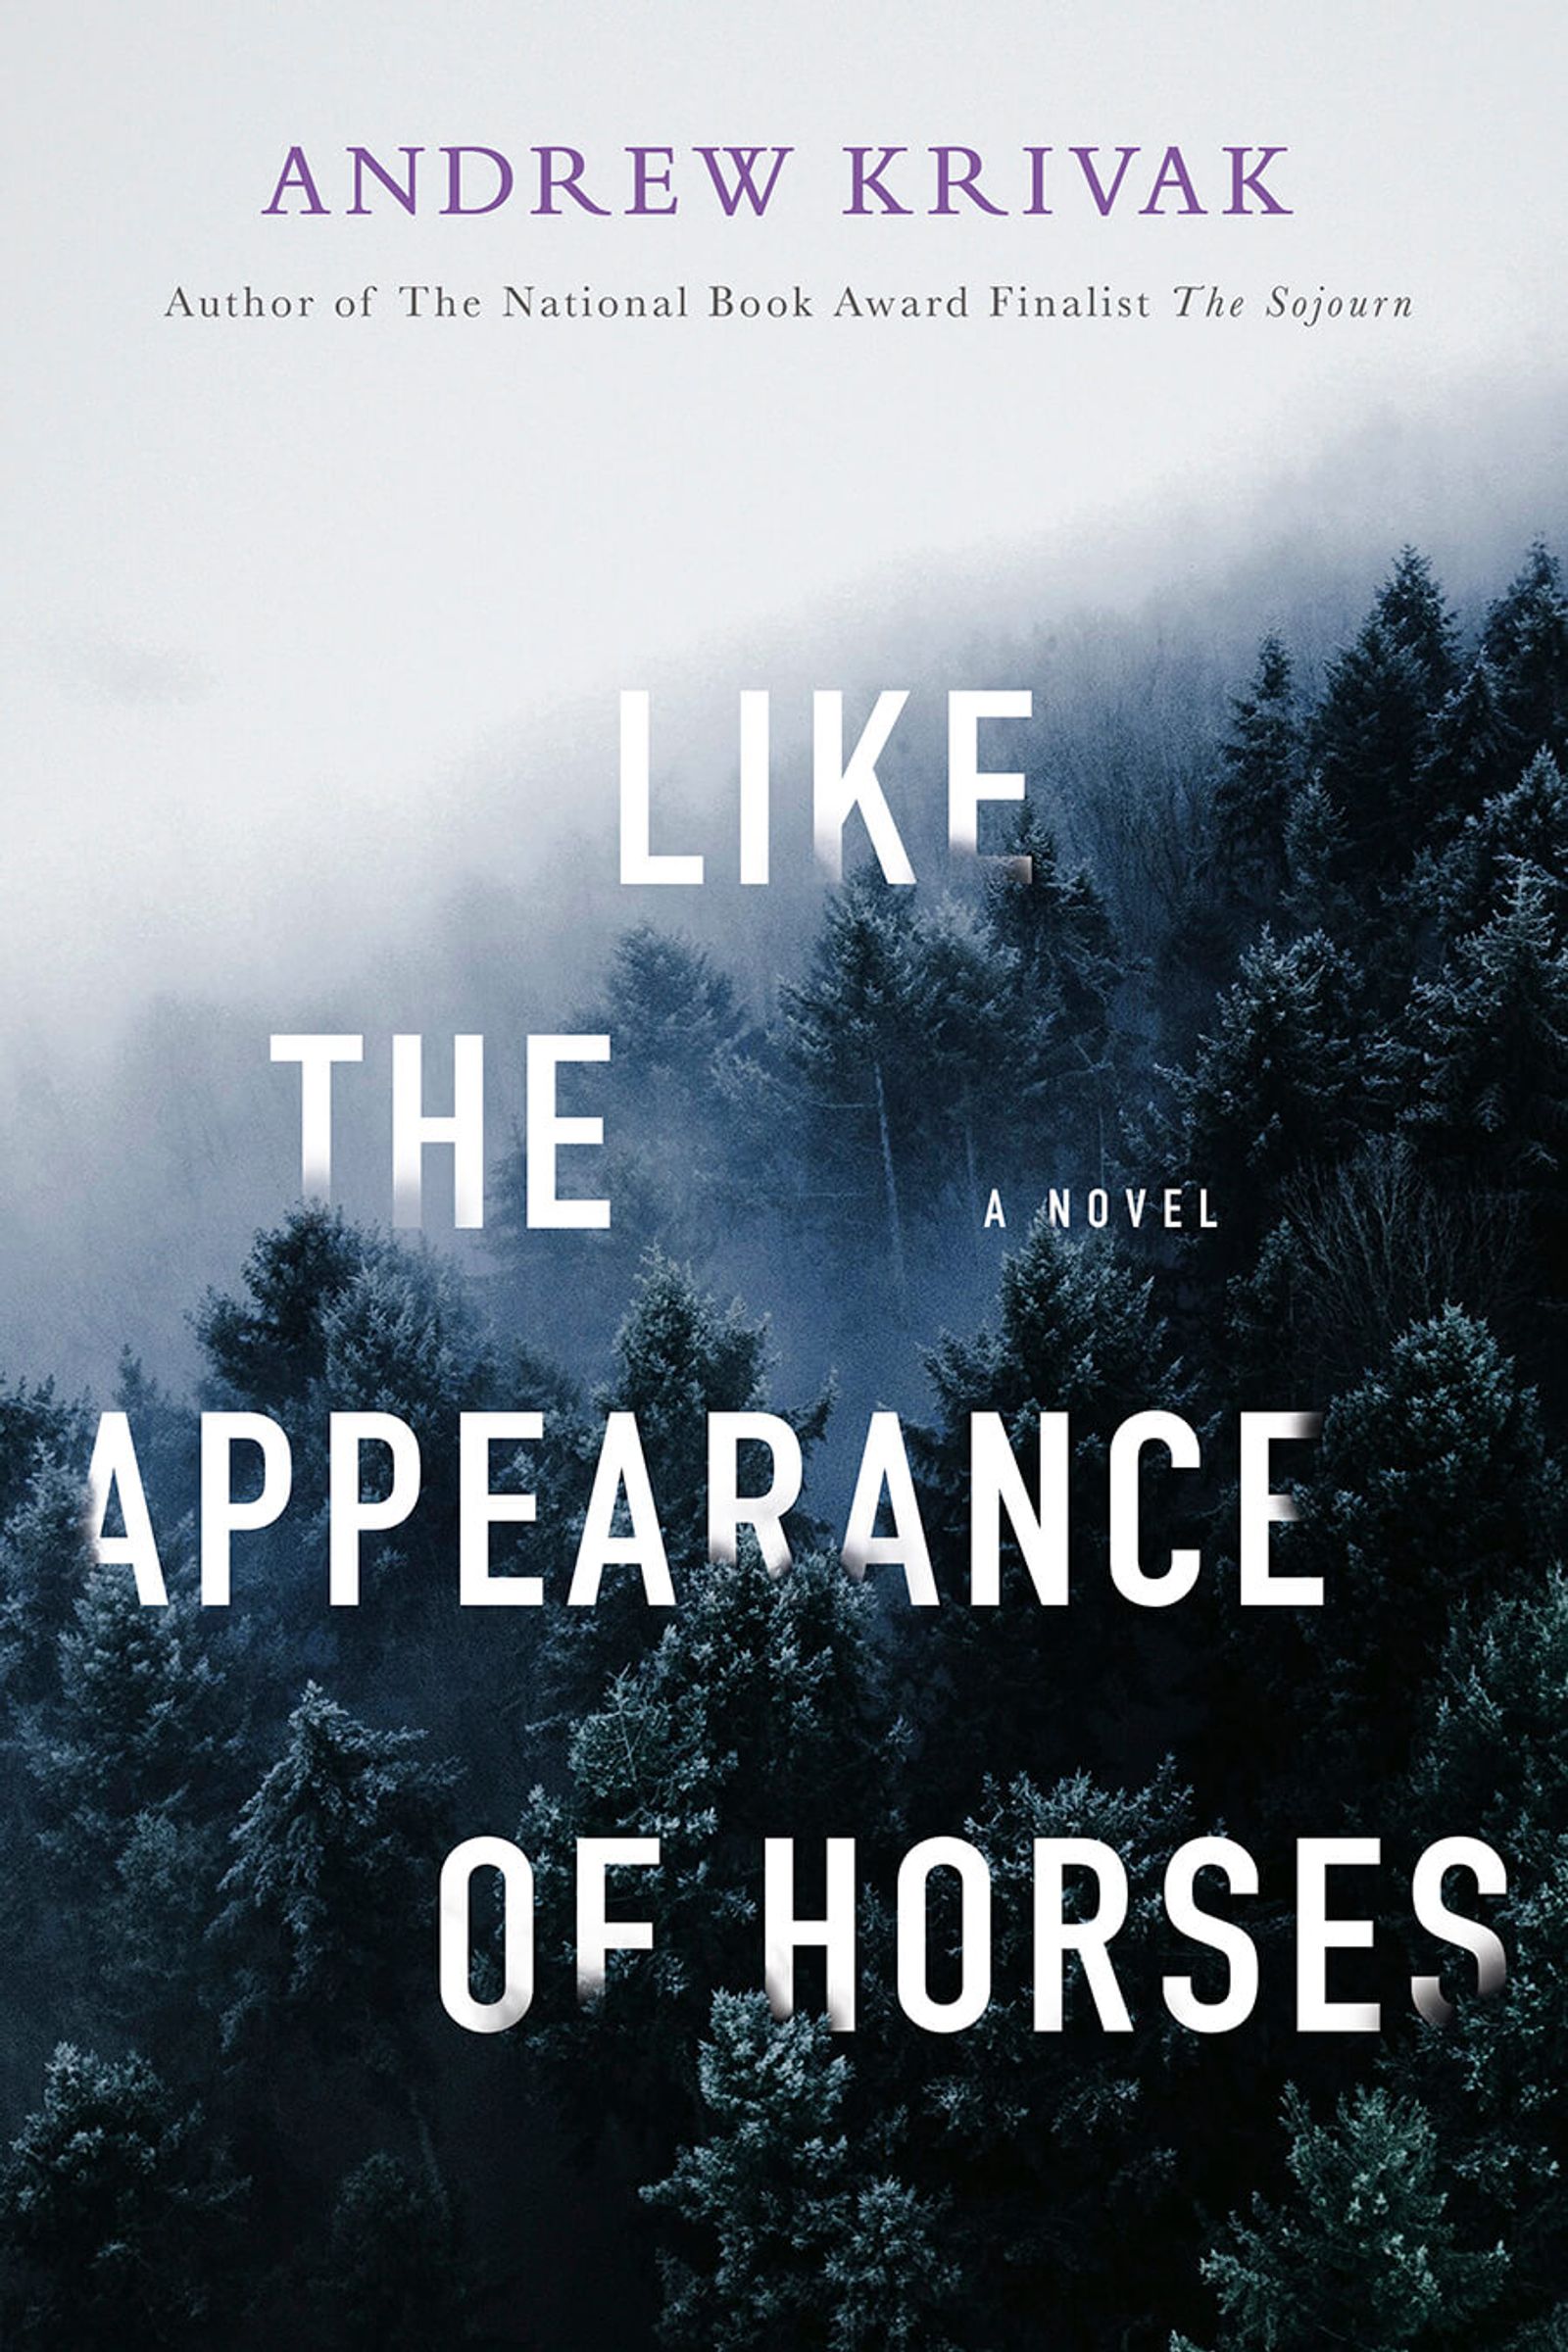 cover image of the book Like the Appearance of Horses